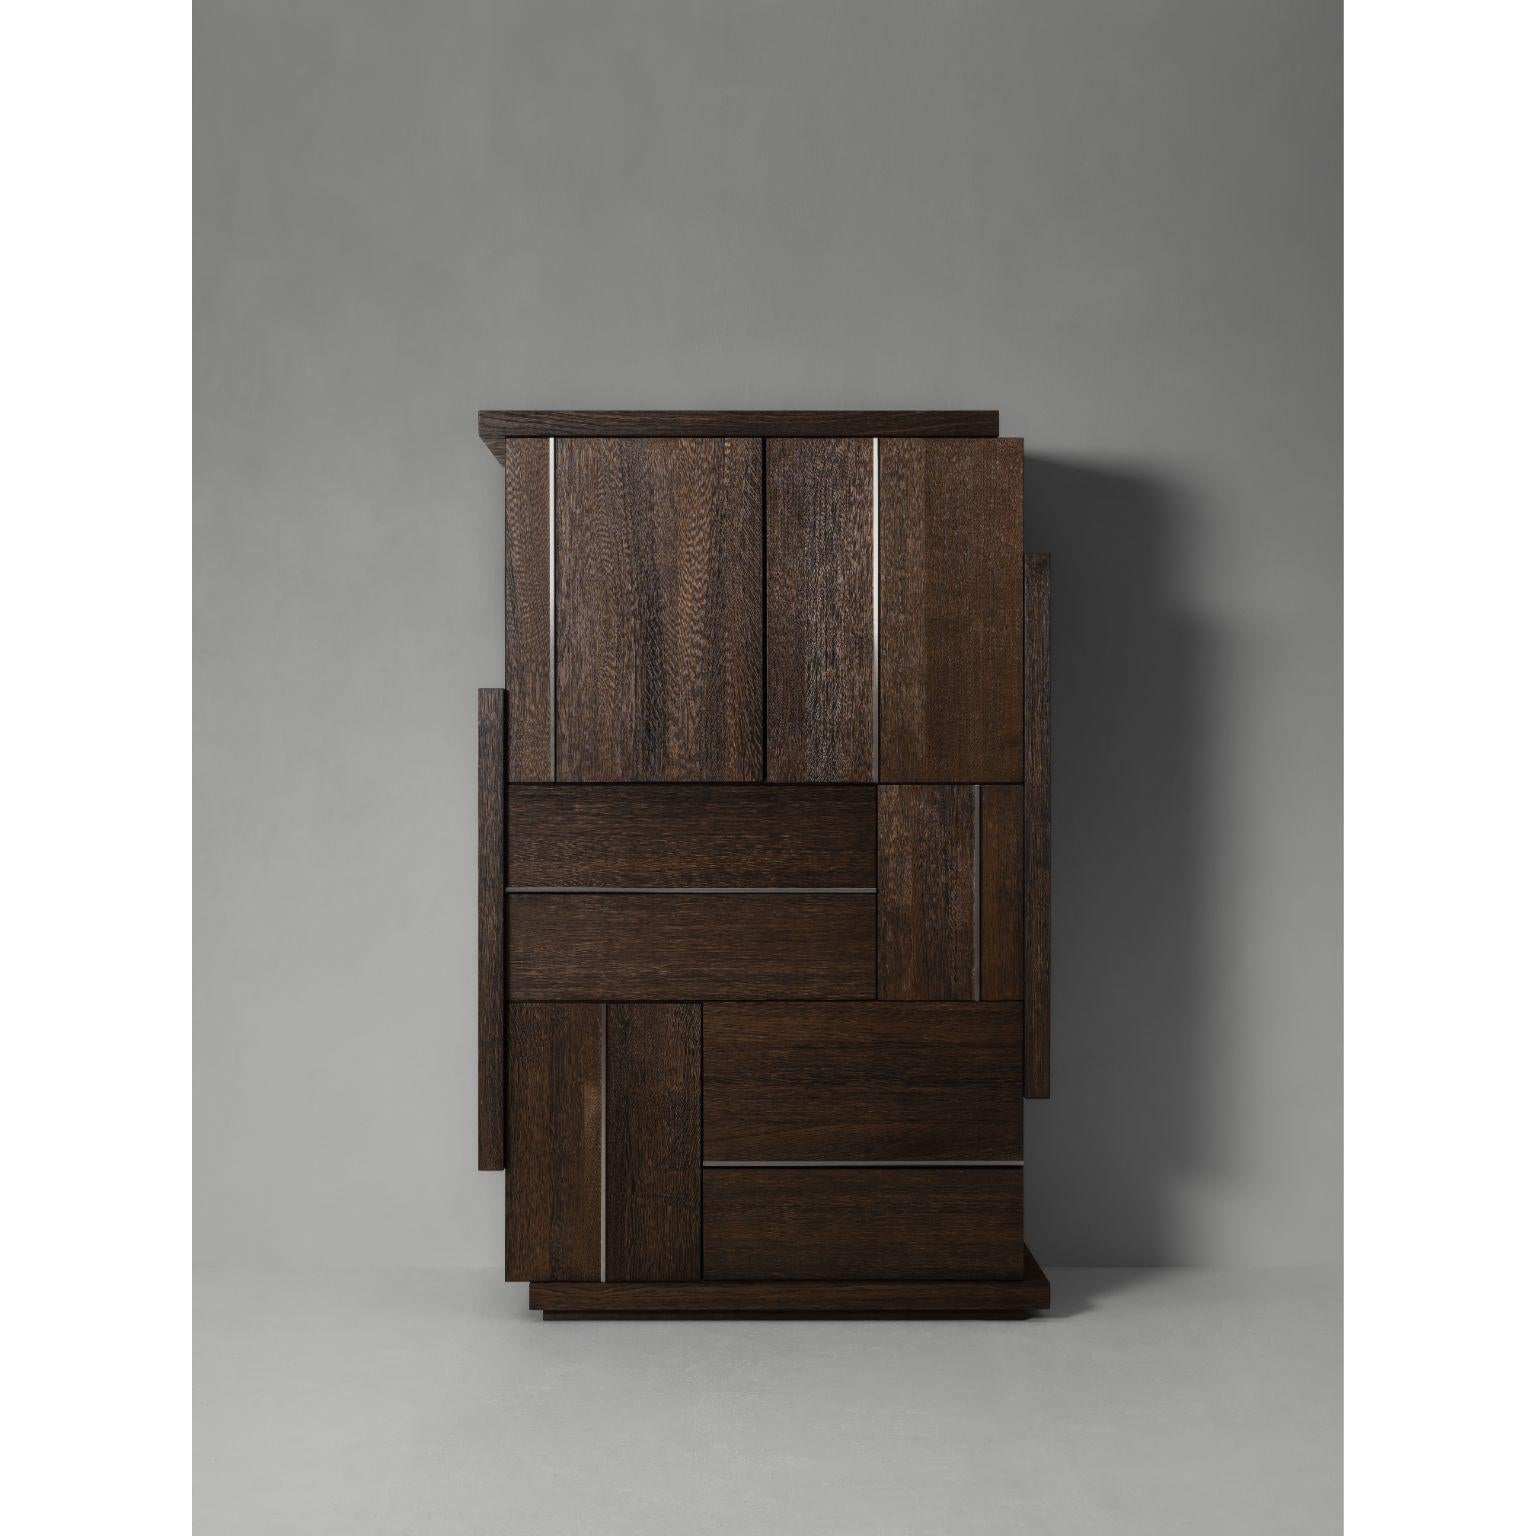 Abqji Cabinet by Van Rossum
Dimensions: D 132 x W 57 x H 210 cm
Materials: Stainless Steel, Brass, Oak, Grey Pepper Brushed
Available in different materials and colours. Please contact us.

A cabinet with a bold and balanced design featuring